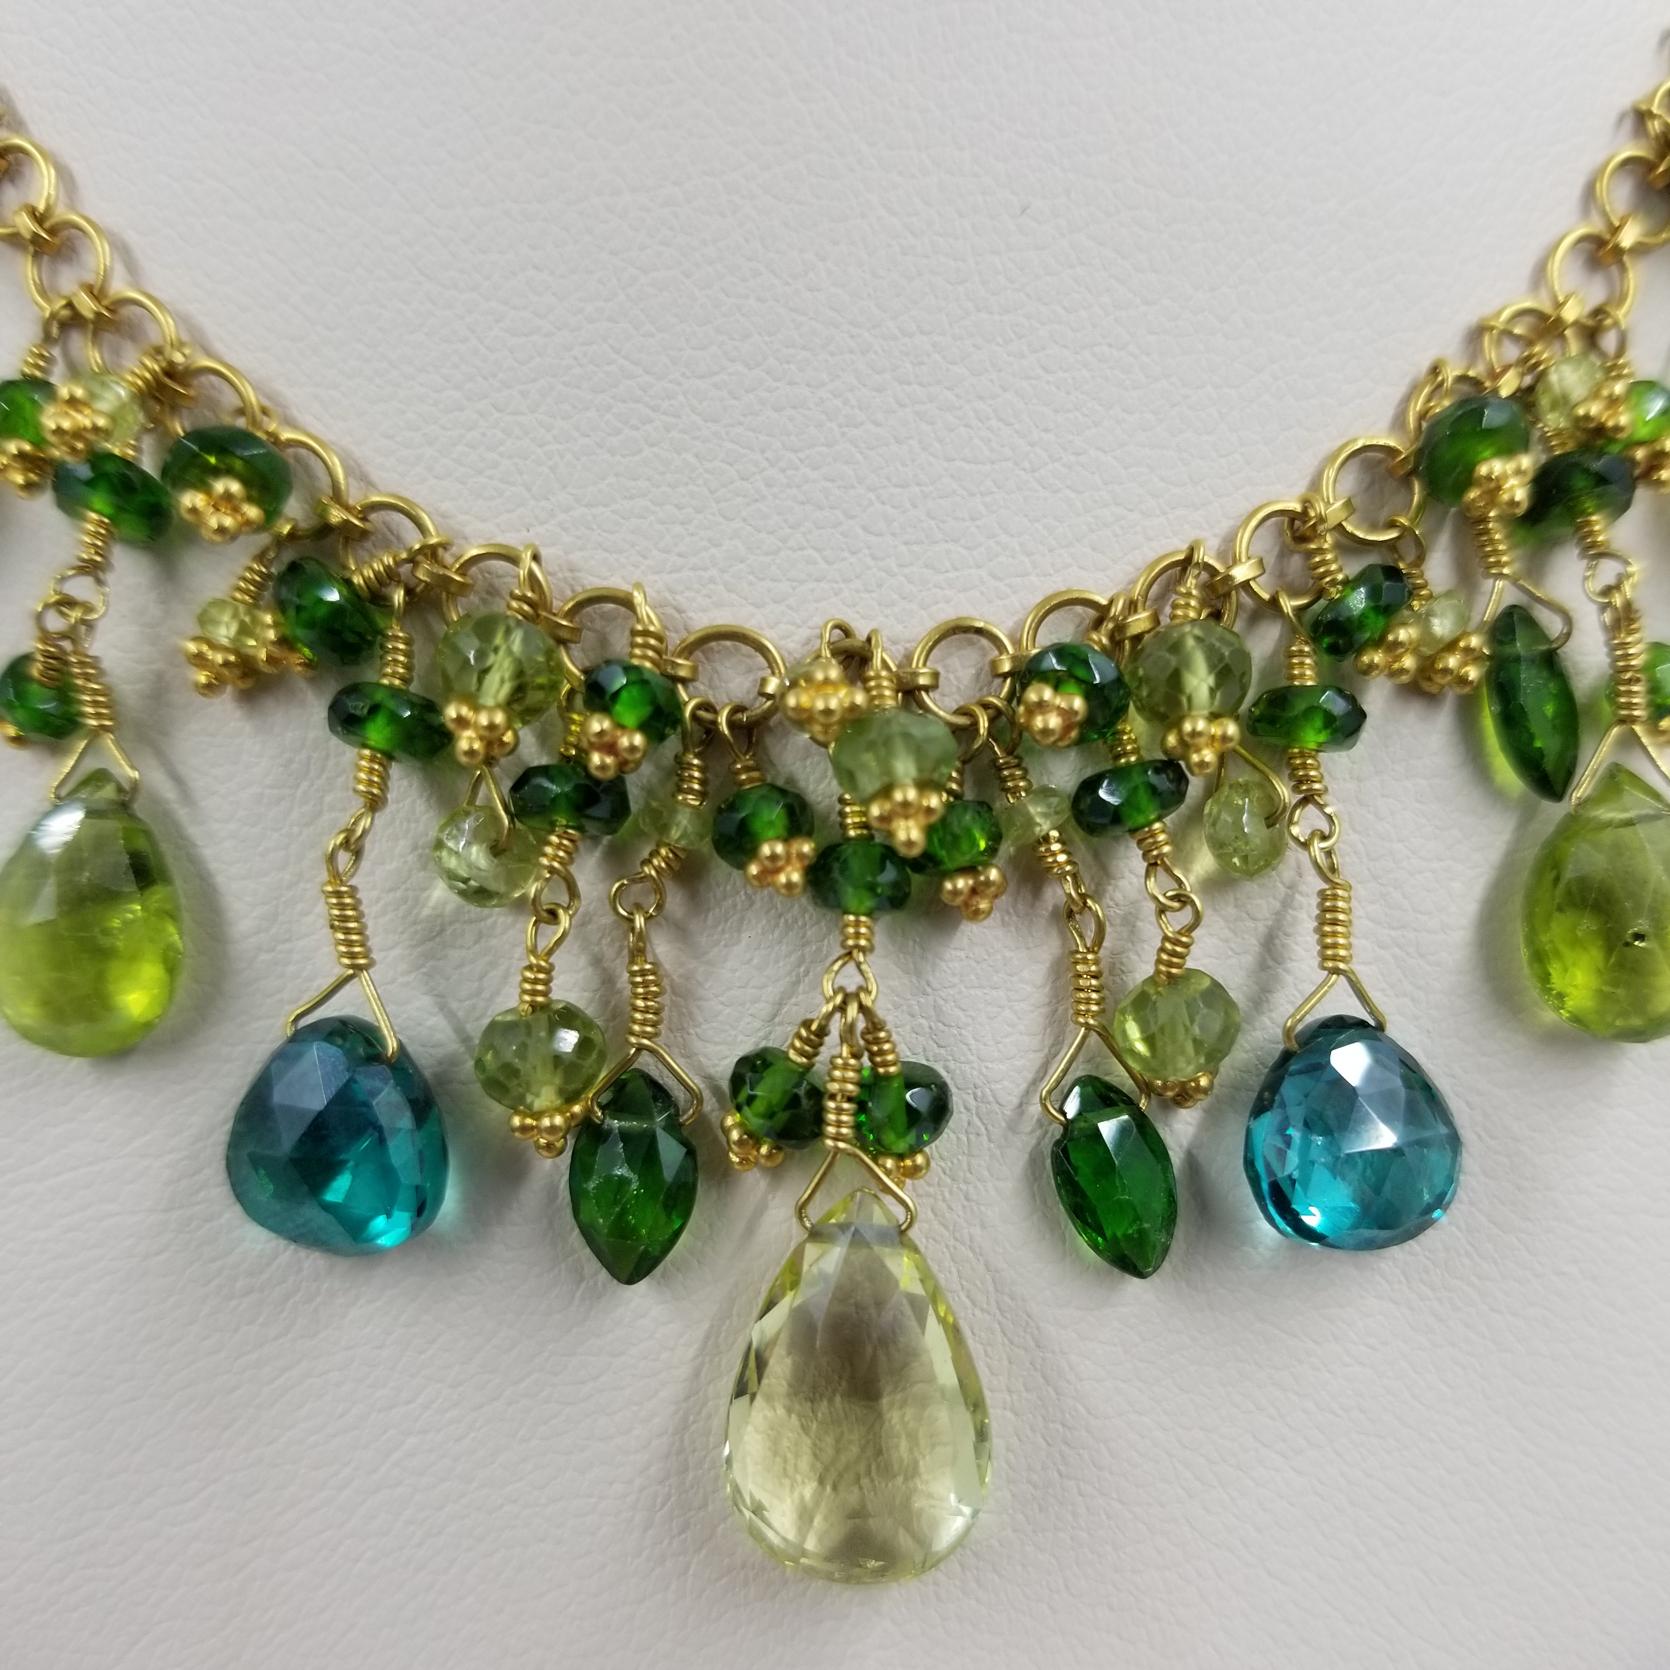 Laura Gibson Multi-Color Gemstone Necklace in 22 Karat Yellow Gold
Lemon & Green Topaz, Peridot, Chrysoberyl, Chrome Diopside, & Lemon Citrine in varying shapes and sizes
39.35 carats total weight
16 inches long
Toggle clasp with designer stamp